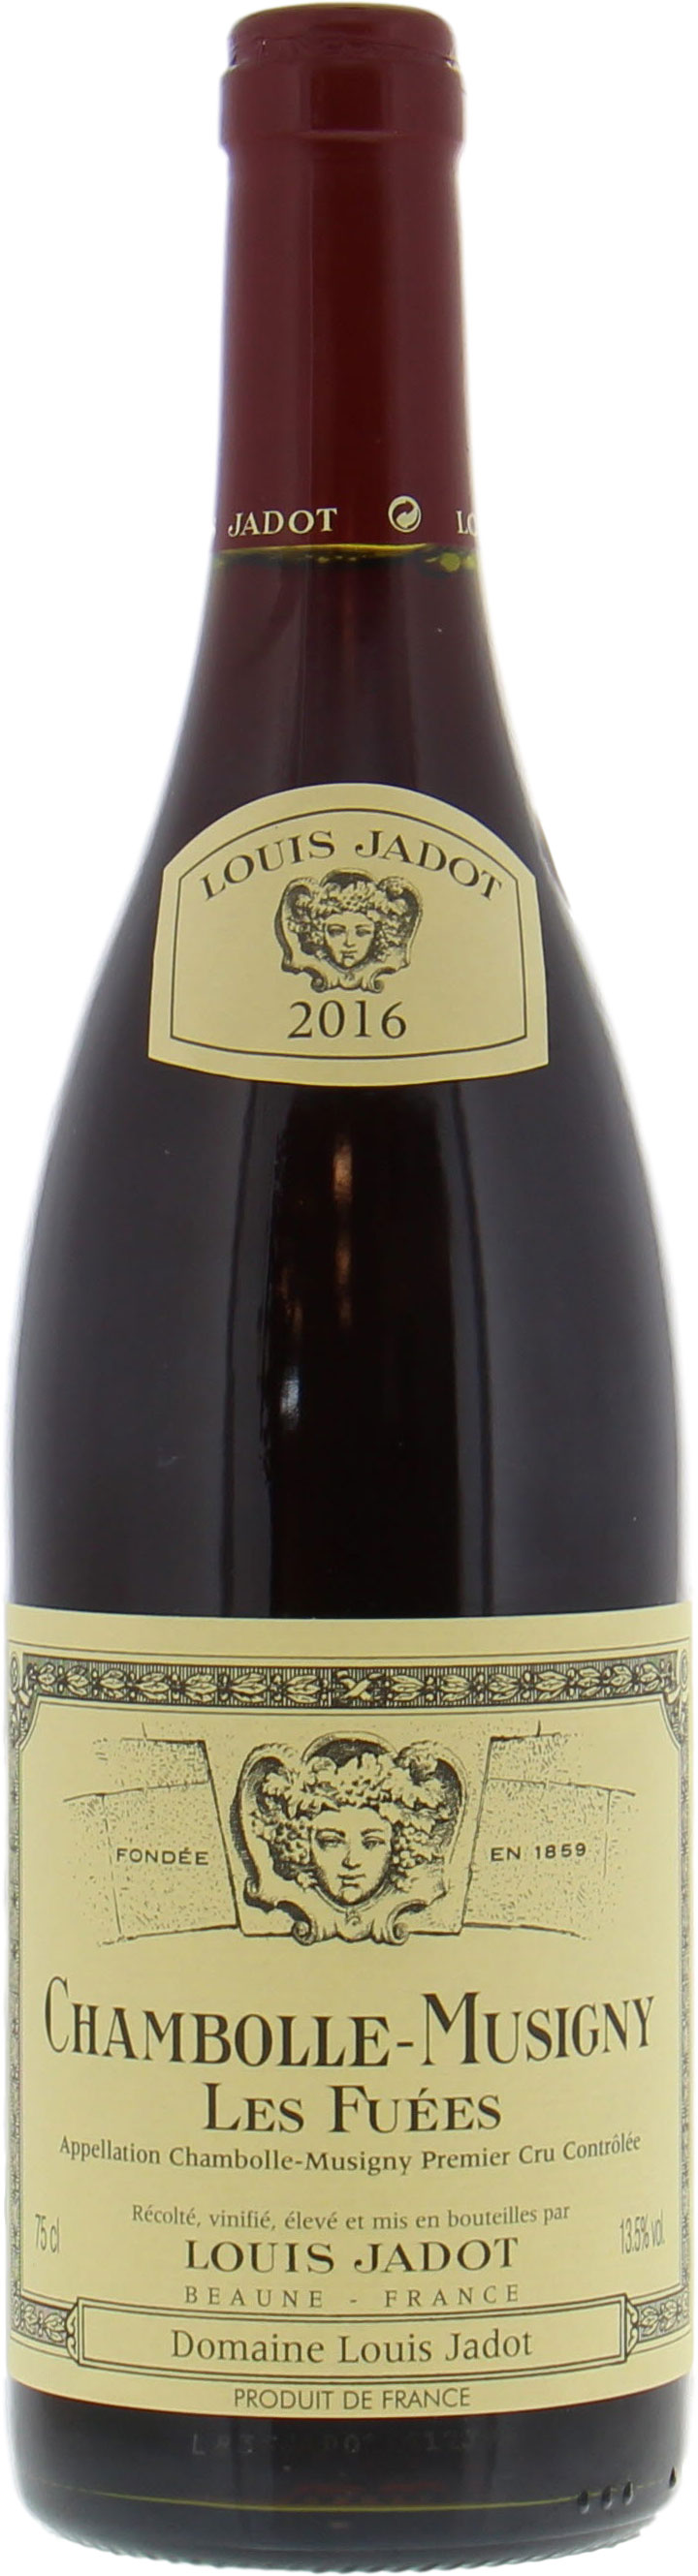 Jadot - Chambolle Musigny les Fuees 2016 Perfect